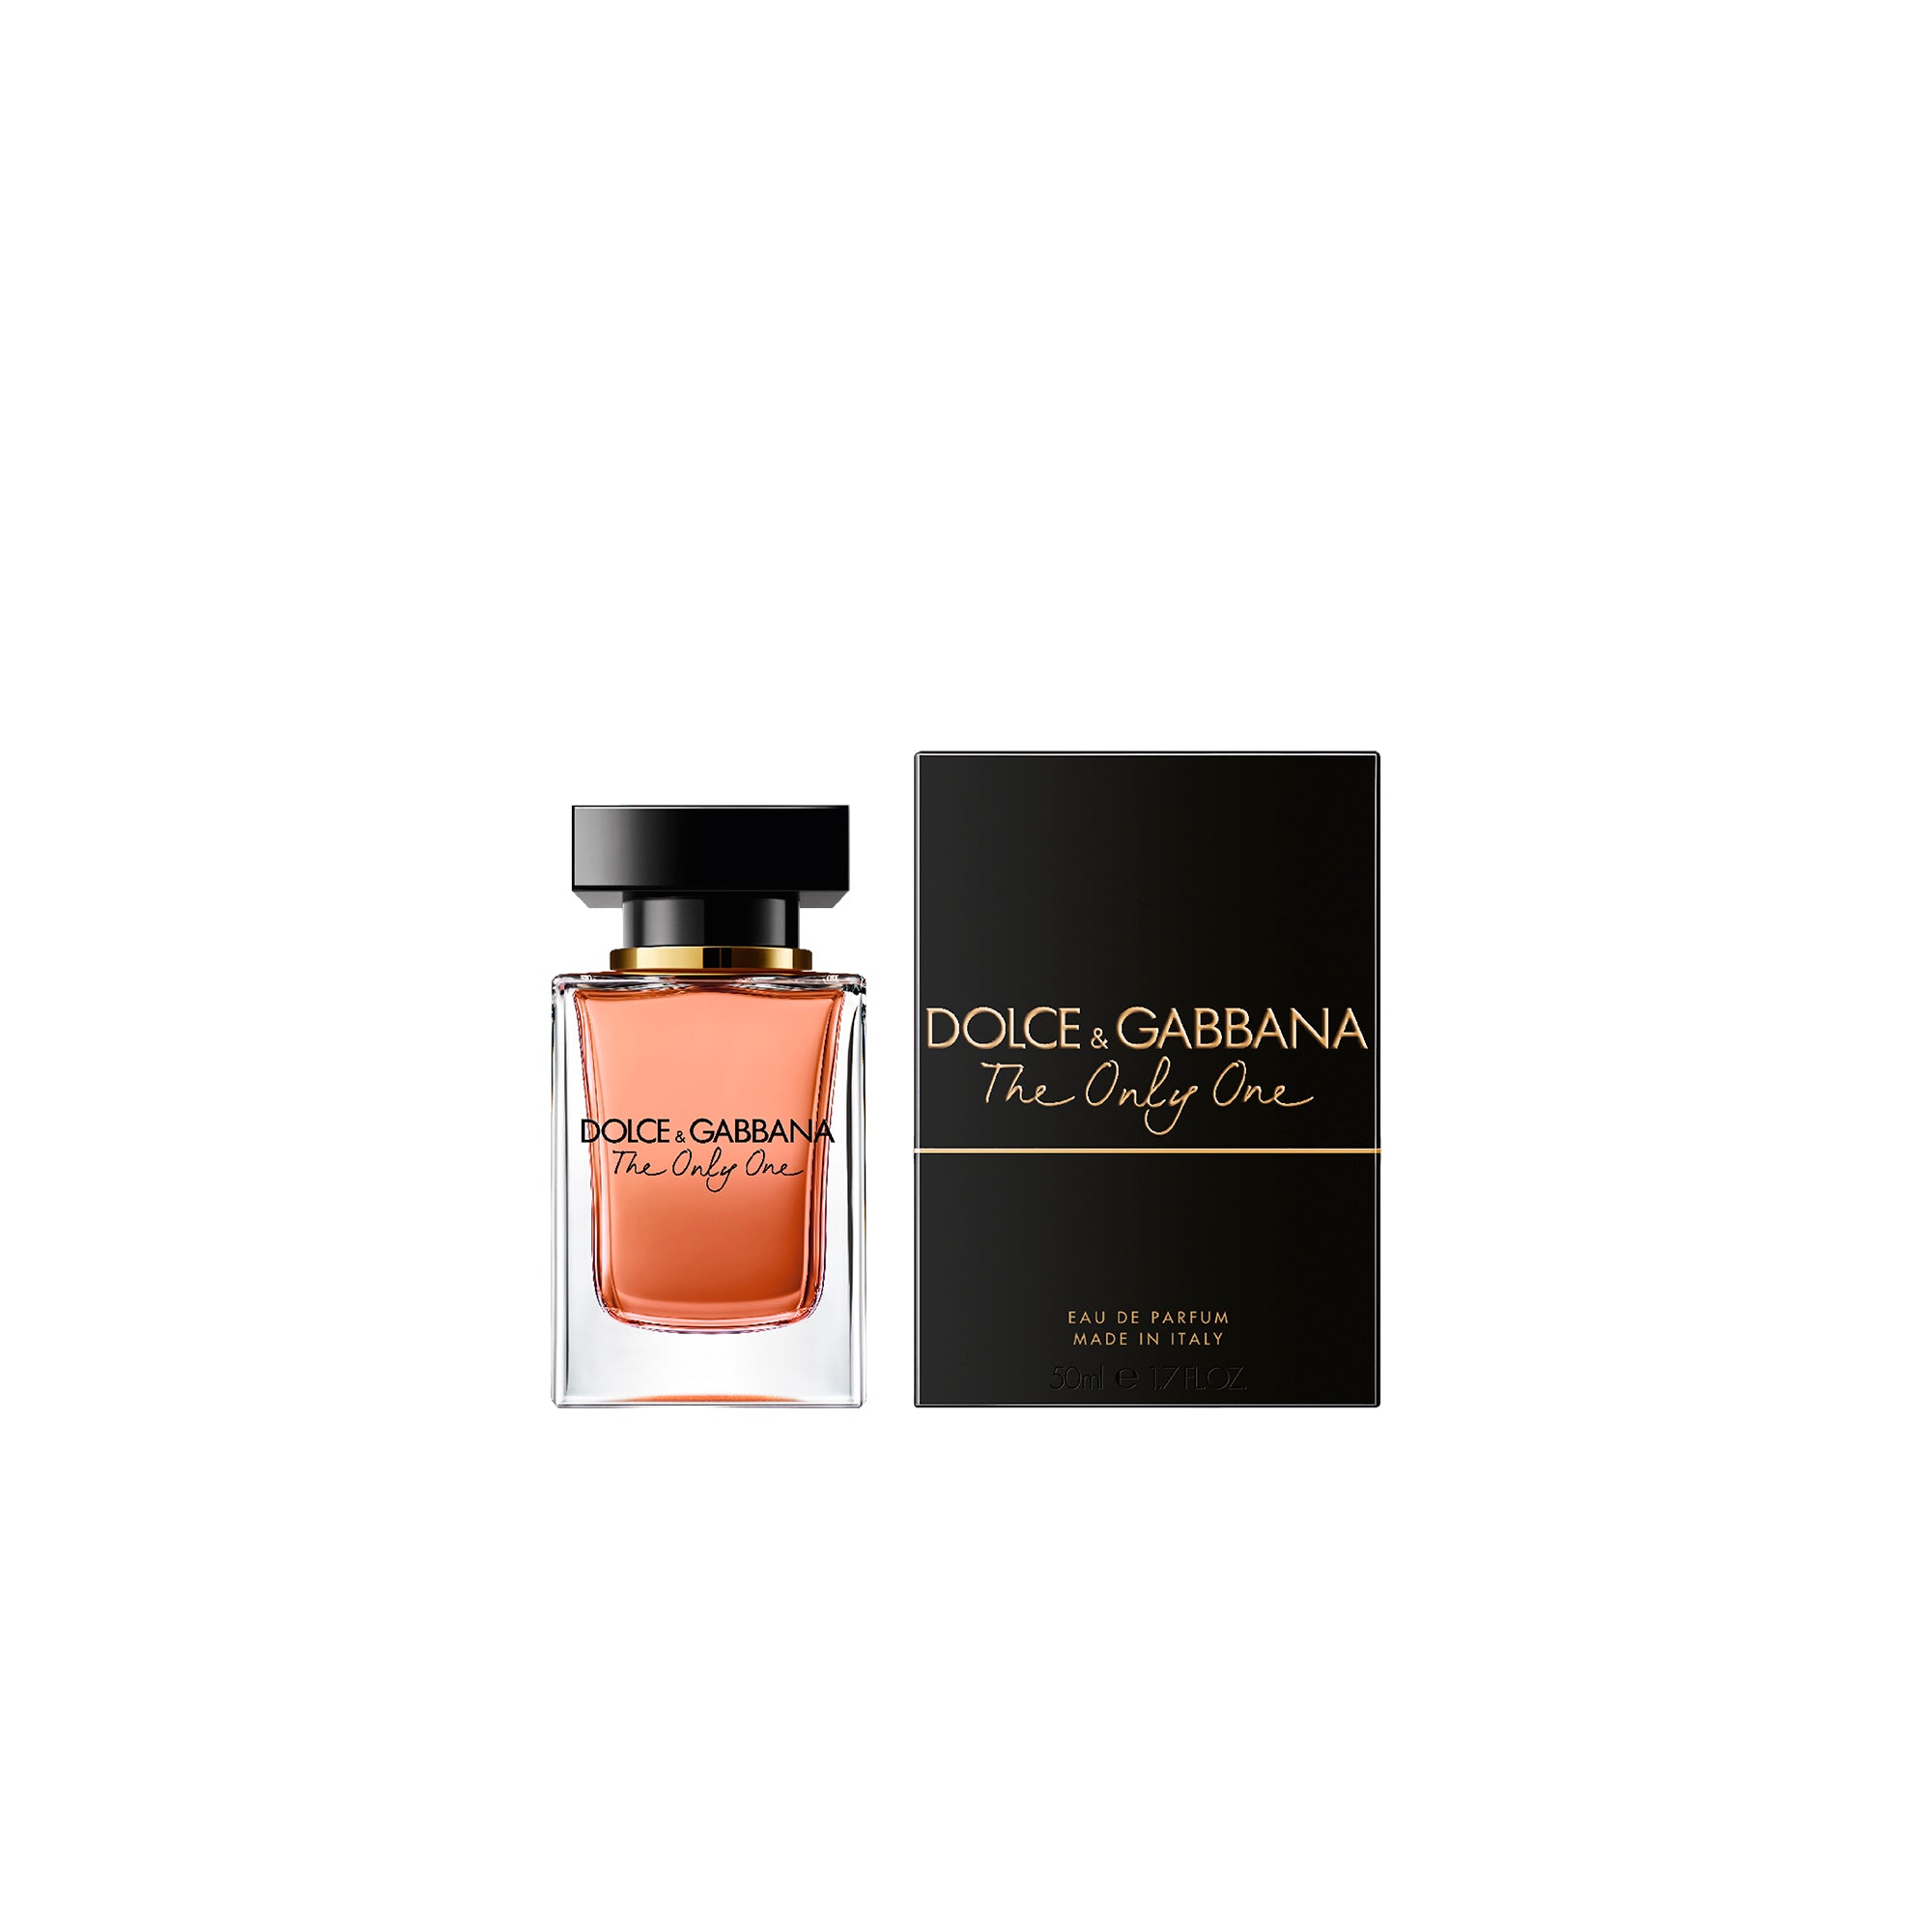 DOLCE & GABBANA The Only One EDP 50ml